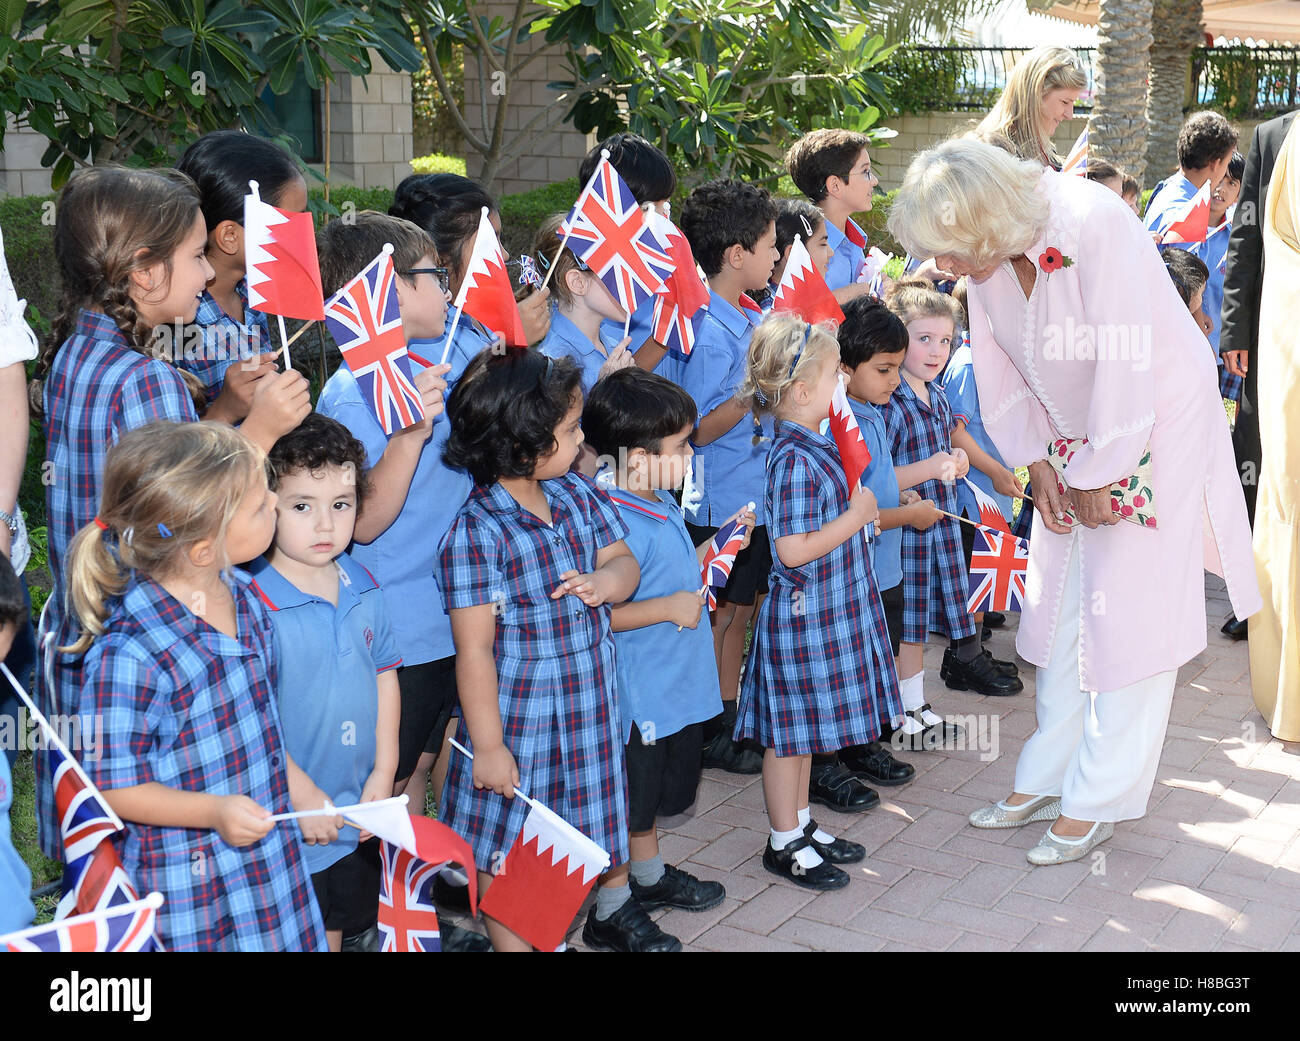 The Duchess of Cornwall is greeted by flag waving pupils at the St Christopher School in Manama, the capital city of Bahrain, during a visit to the country by the royal couple as part of their tour of the Middle East. PRESS ASSOCIATION Photo, Picture date: Thursday November 10, 2016. See PA story ROYAL Tour. Photo credit should read: John Stillwell/PA Wire Stock Photo